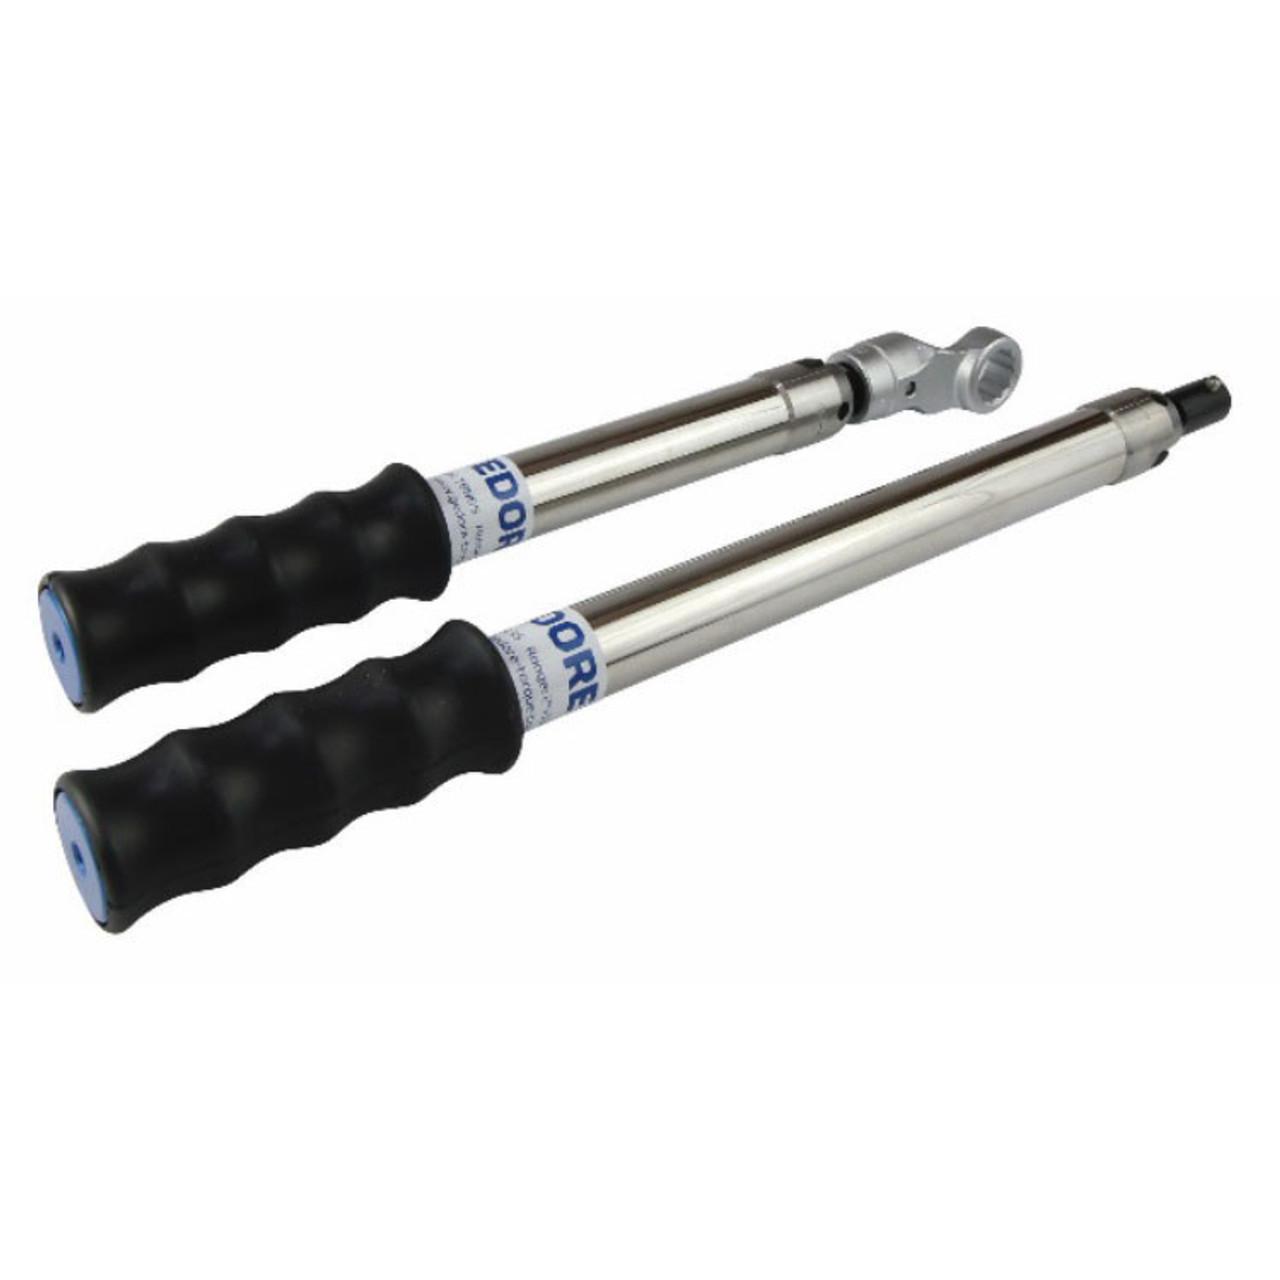 Torque wrench 0.4-2Nm TBN2 G